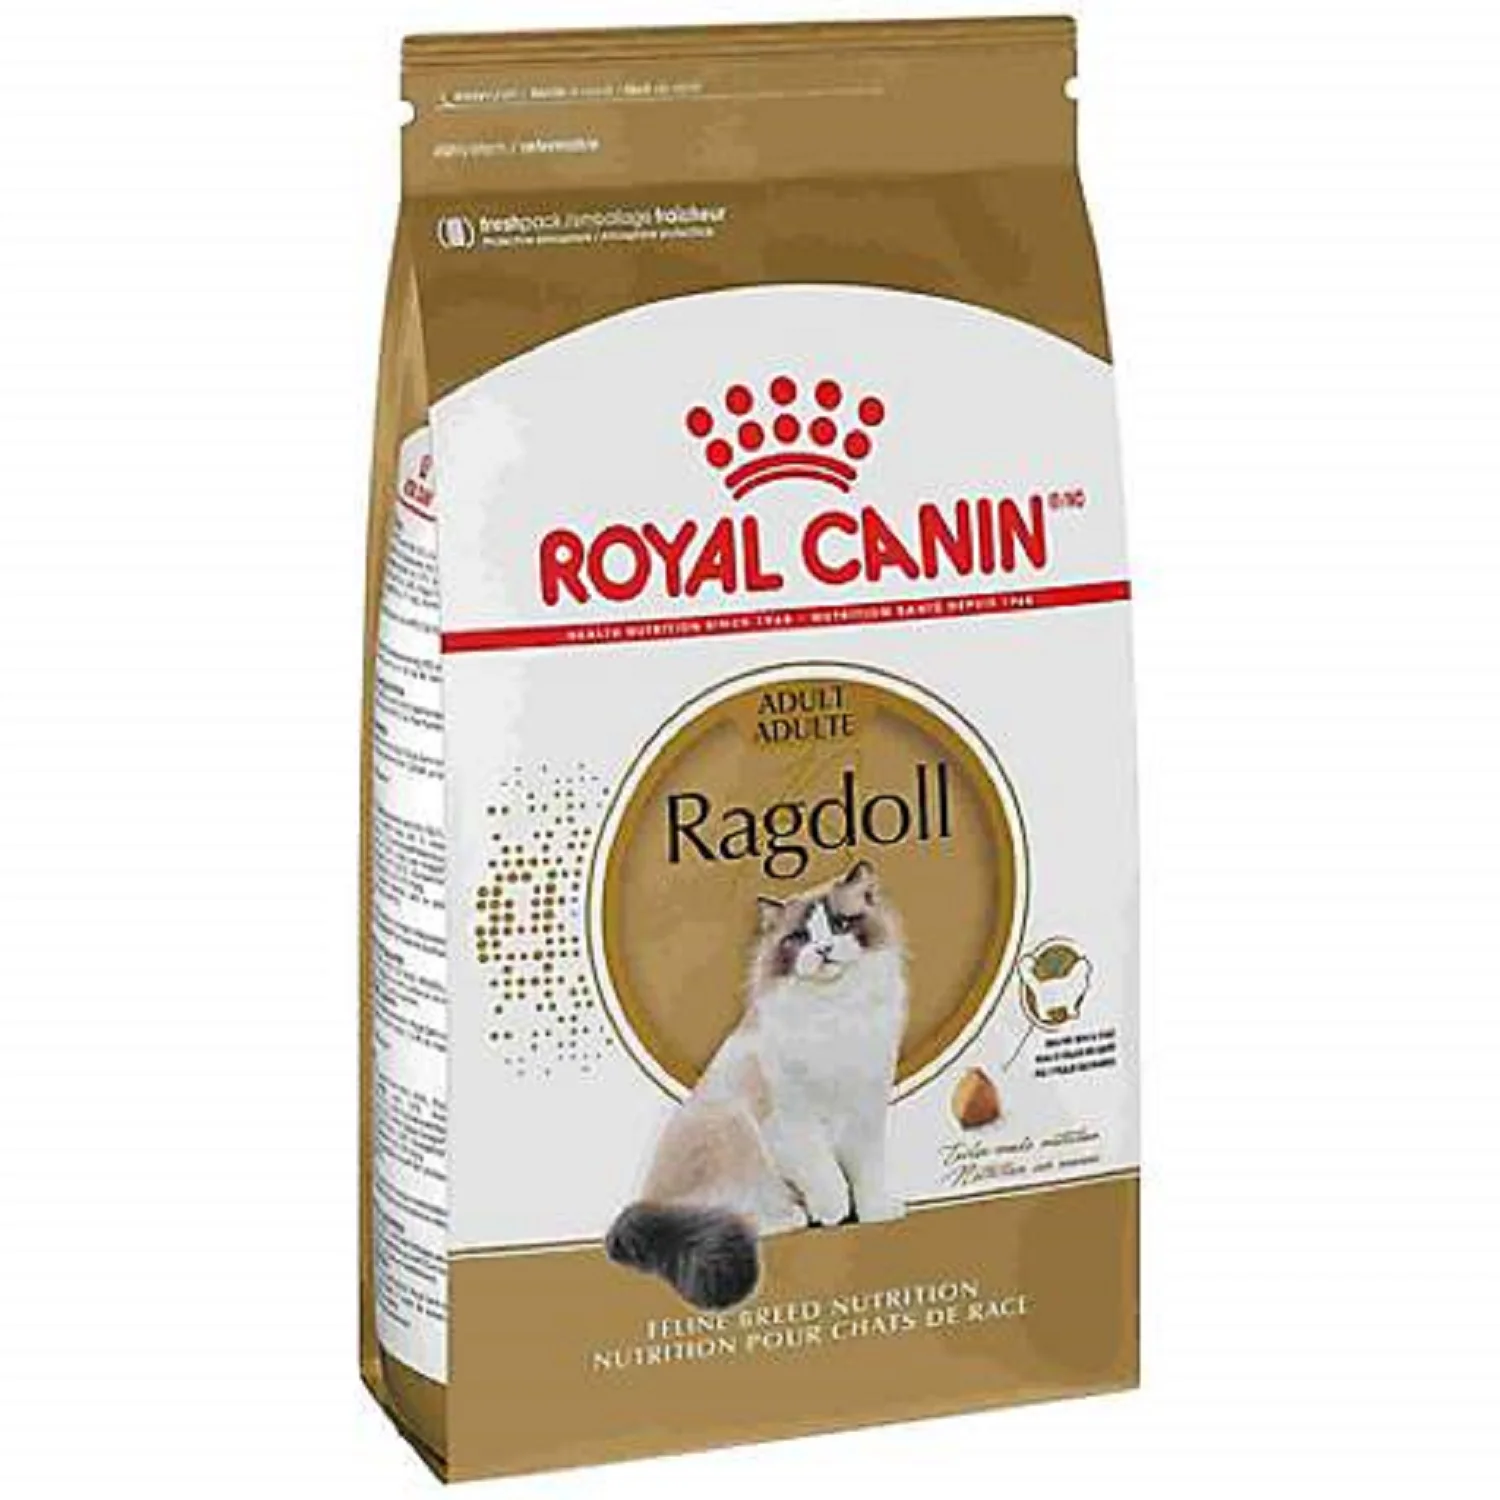 Dry Dog Food Exporters / Royal Canin Fit 32 Dry Cats and Dogs Foods for sale / Best Quality Wholesale Royal Canin Dog Food